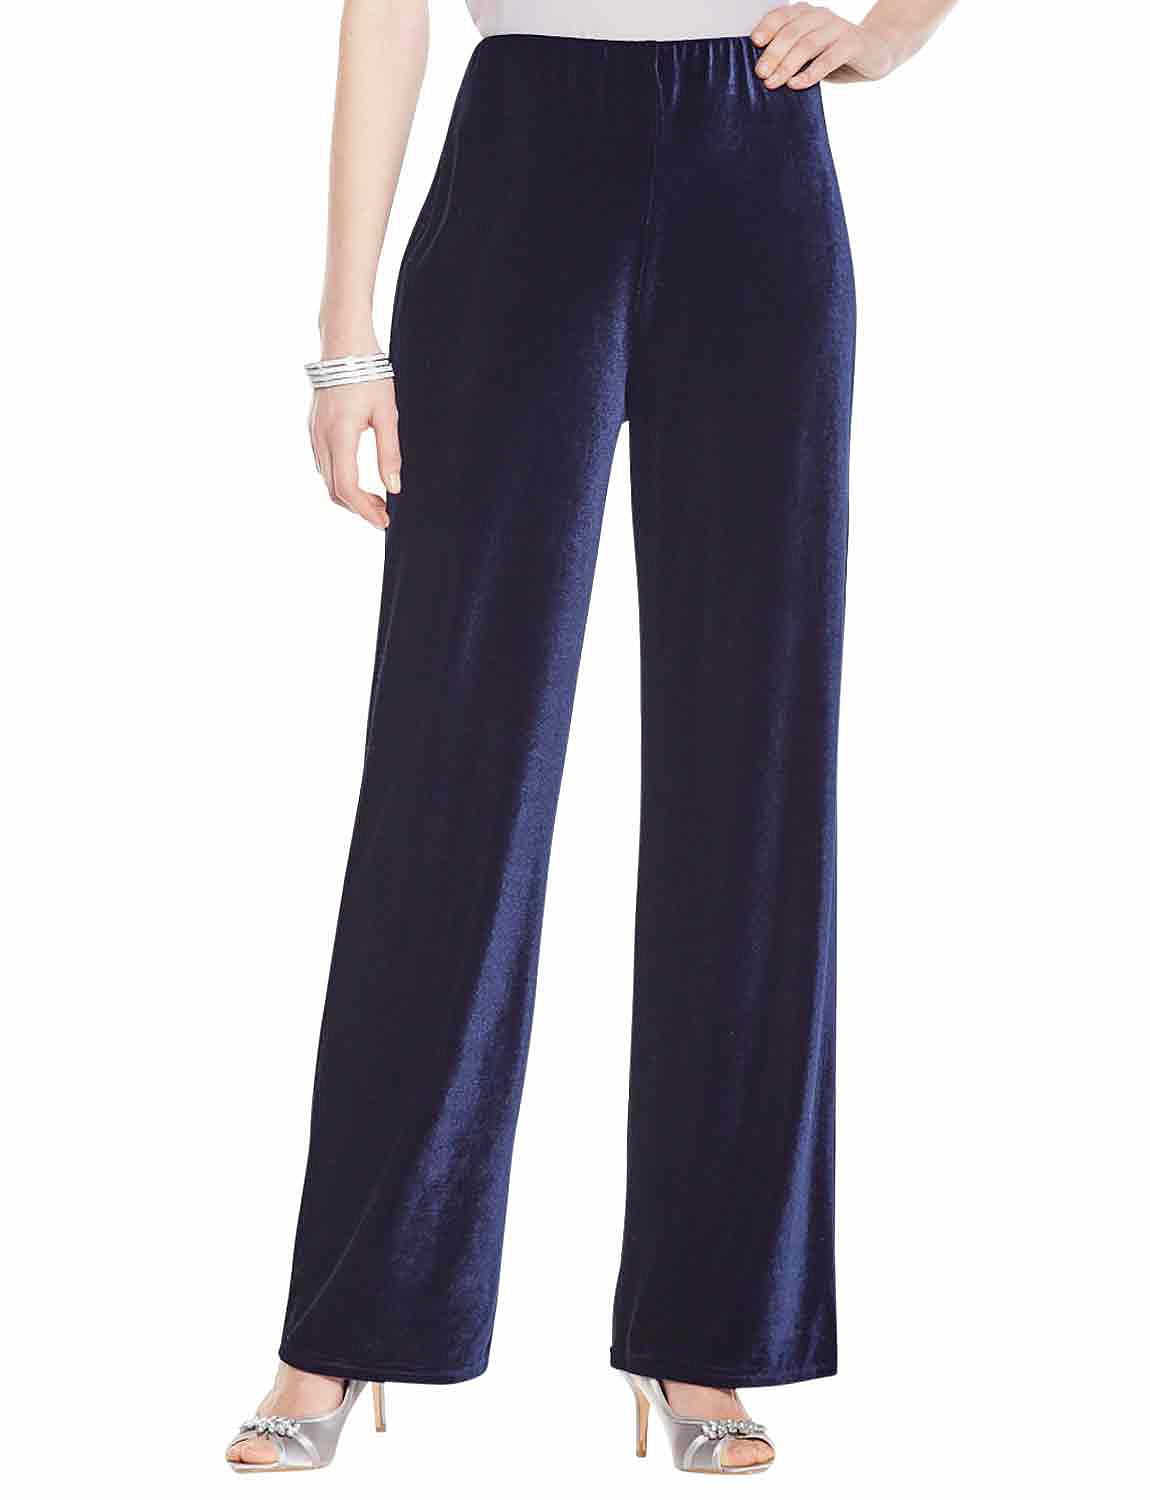 Aggregate more than 232 navy velvet trousers ladies best